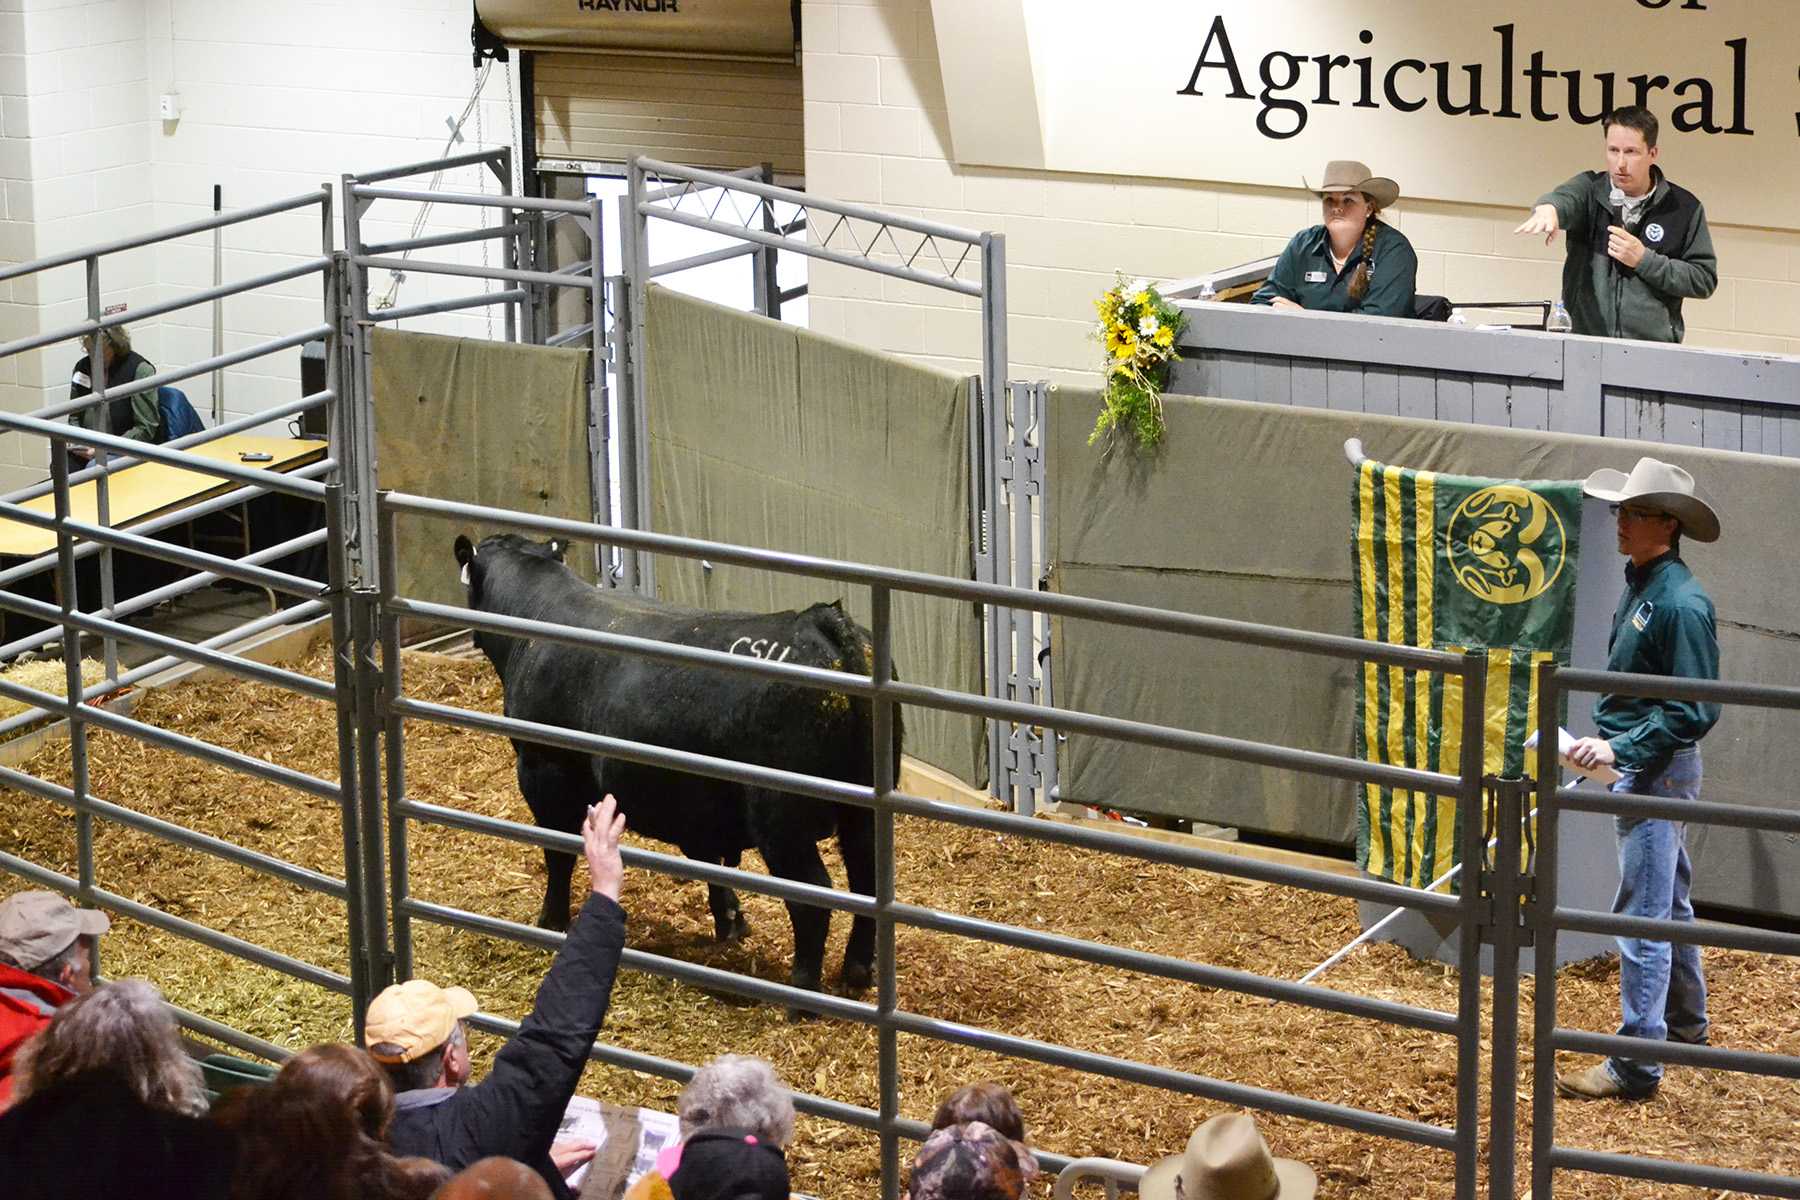 Seedstock Merchandising Team member Kim Rounds assists Dr. Jason Ahola during CSU's 38th Annual ARDEC Bull Sale. Meanwhile, Seedstock Merchandising Team member Carson Guenzi moves the bulls around the pen pointing out the current lot number to buyers in the audience.